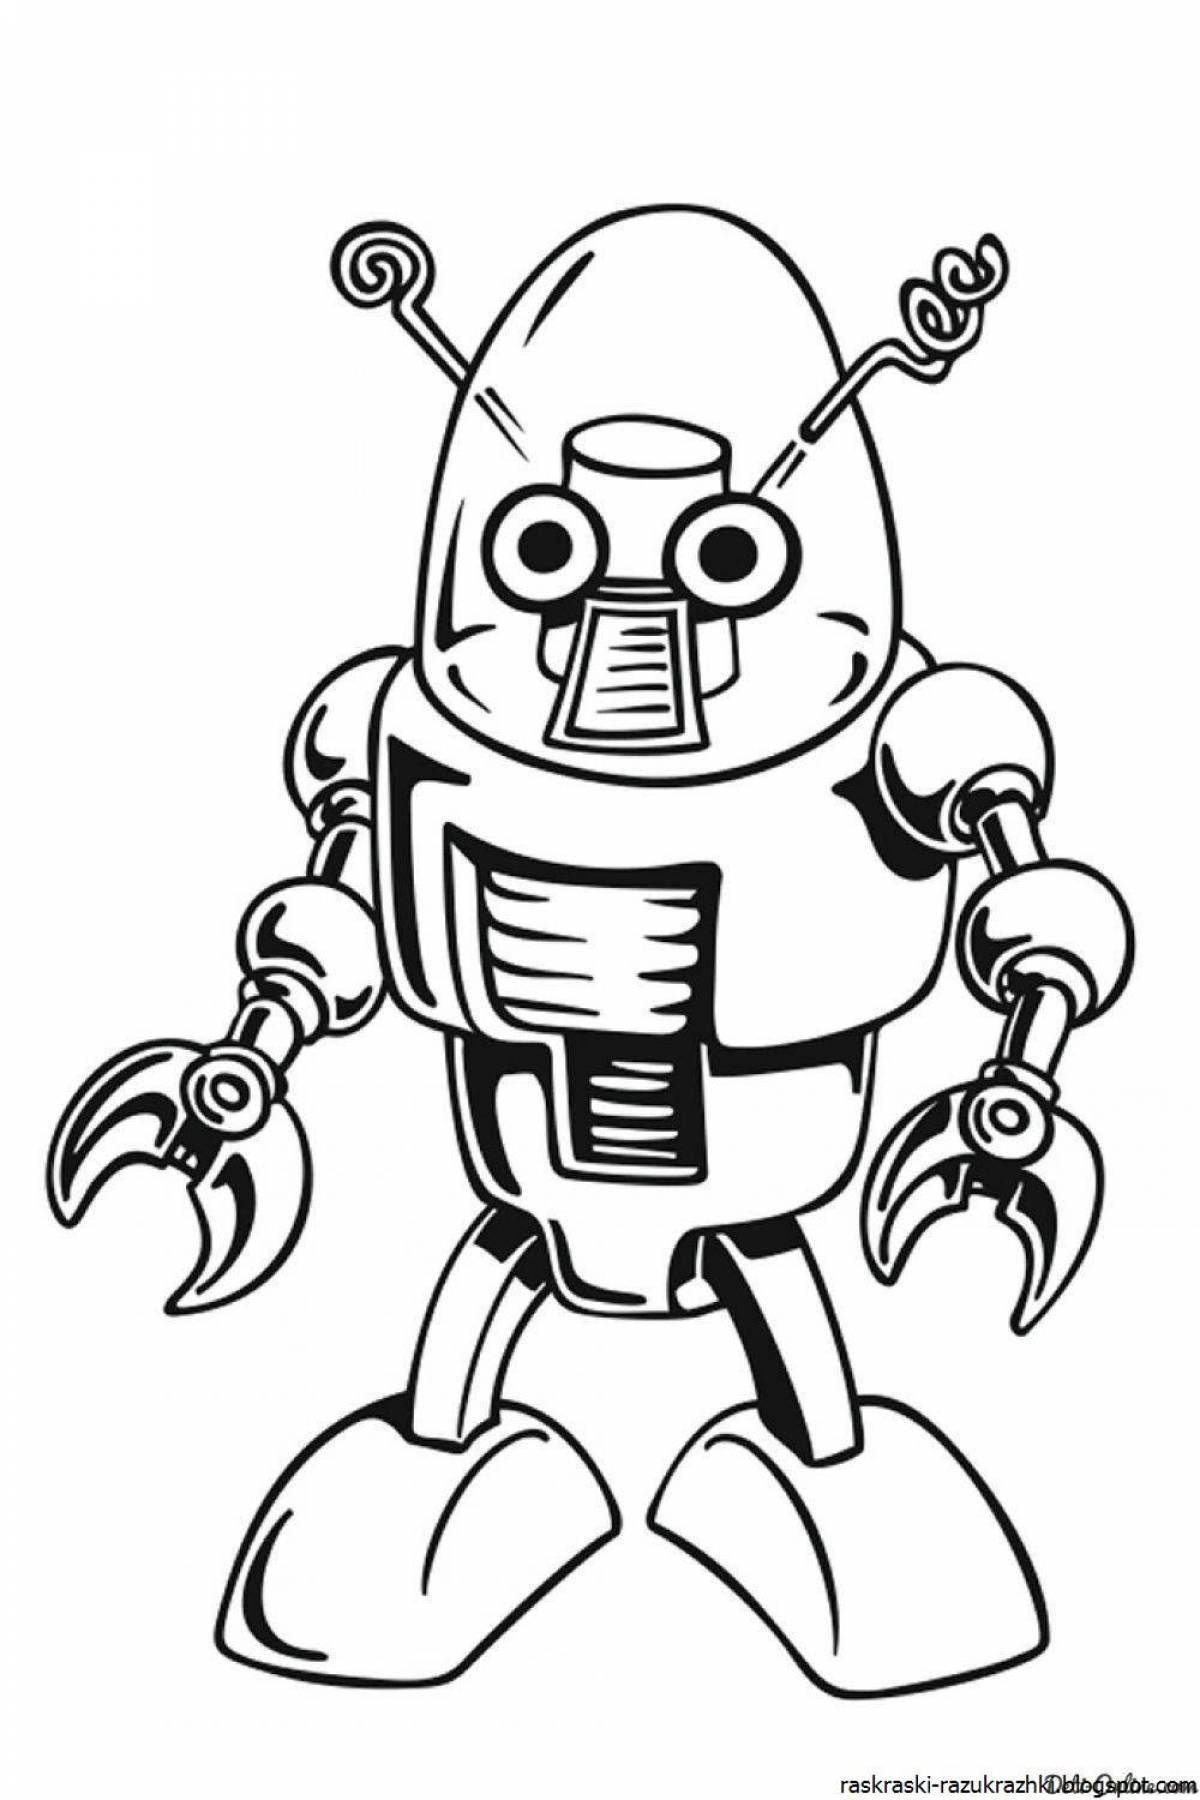 Colorful robot coloring book for kids